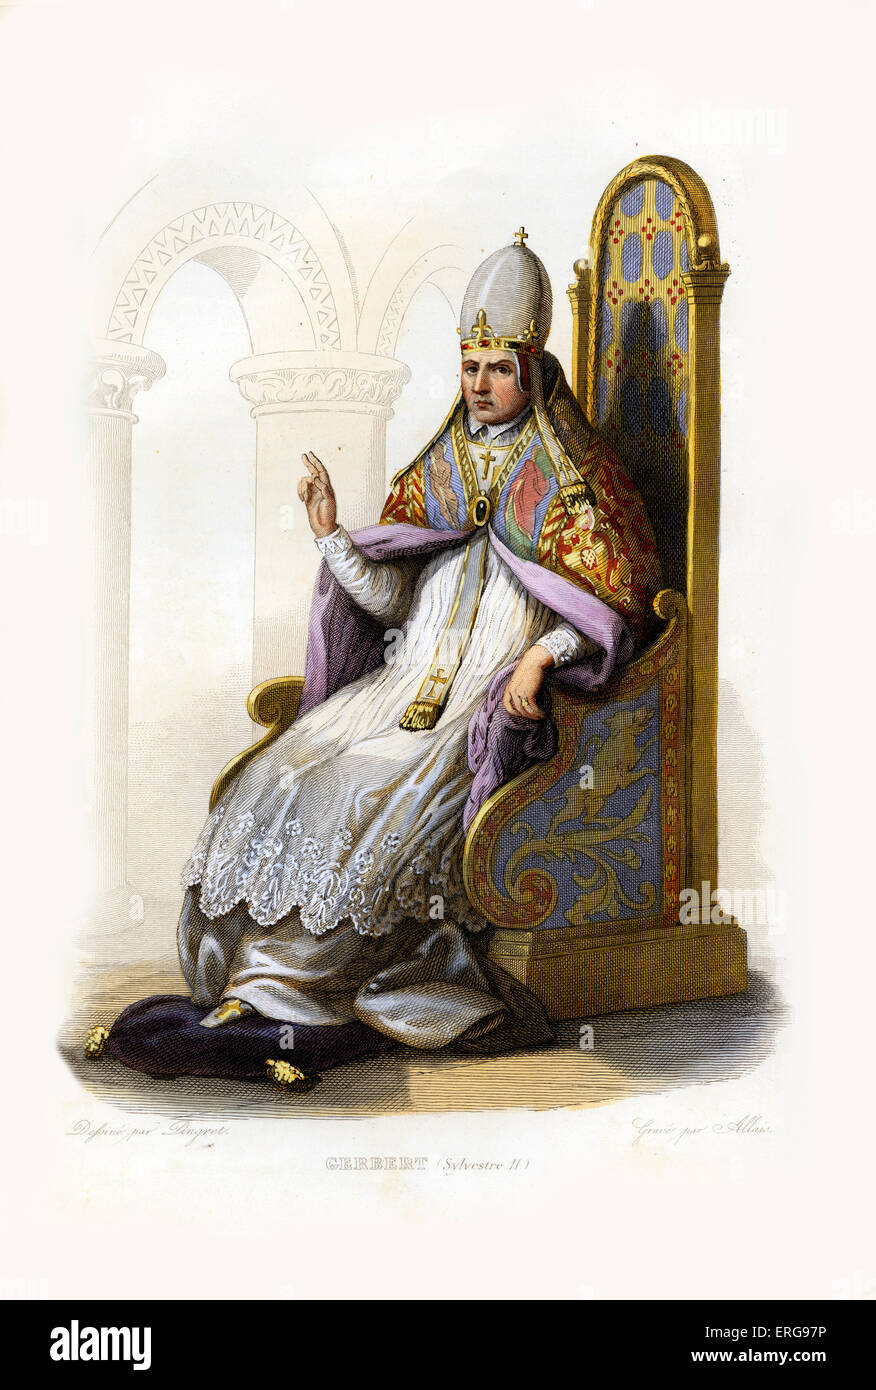 Port pegs Forkludret Pope Sylvester II (or Silvester II), born Gerbert d'Aurillac. Prolific  scholar, teacher, and Pope. c. 940-1003. Engraving by Stock Photo - Alamy